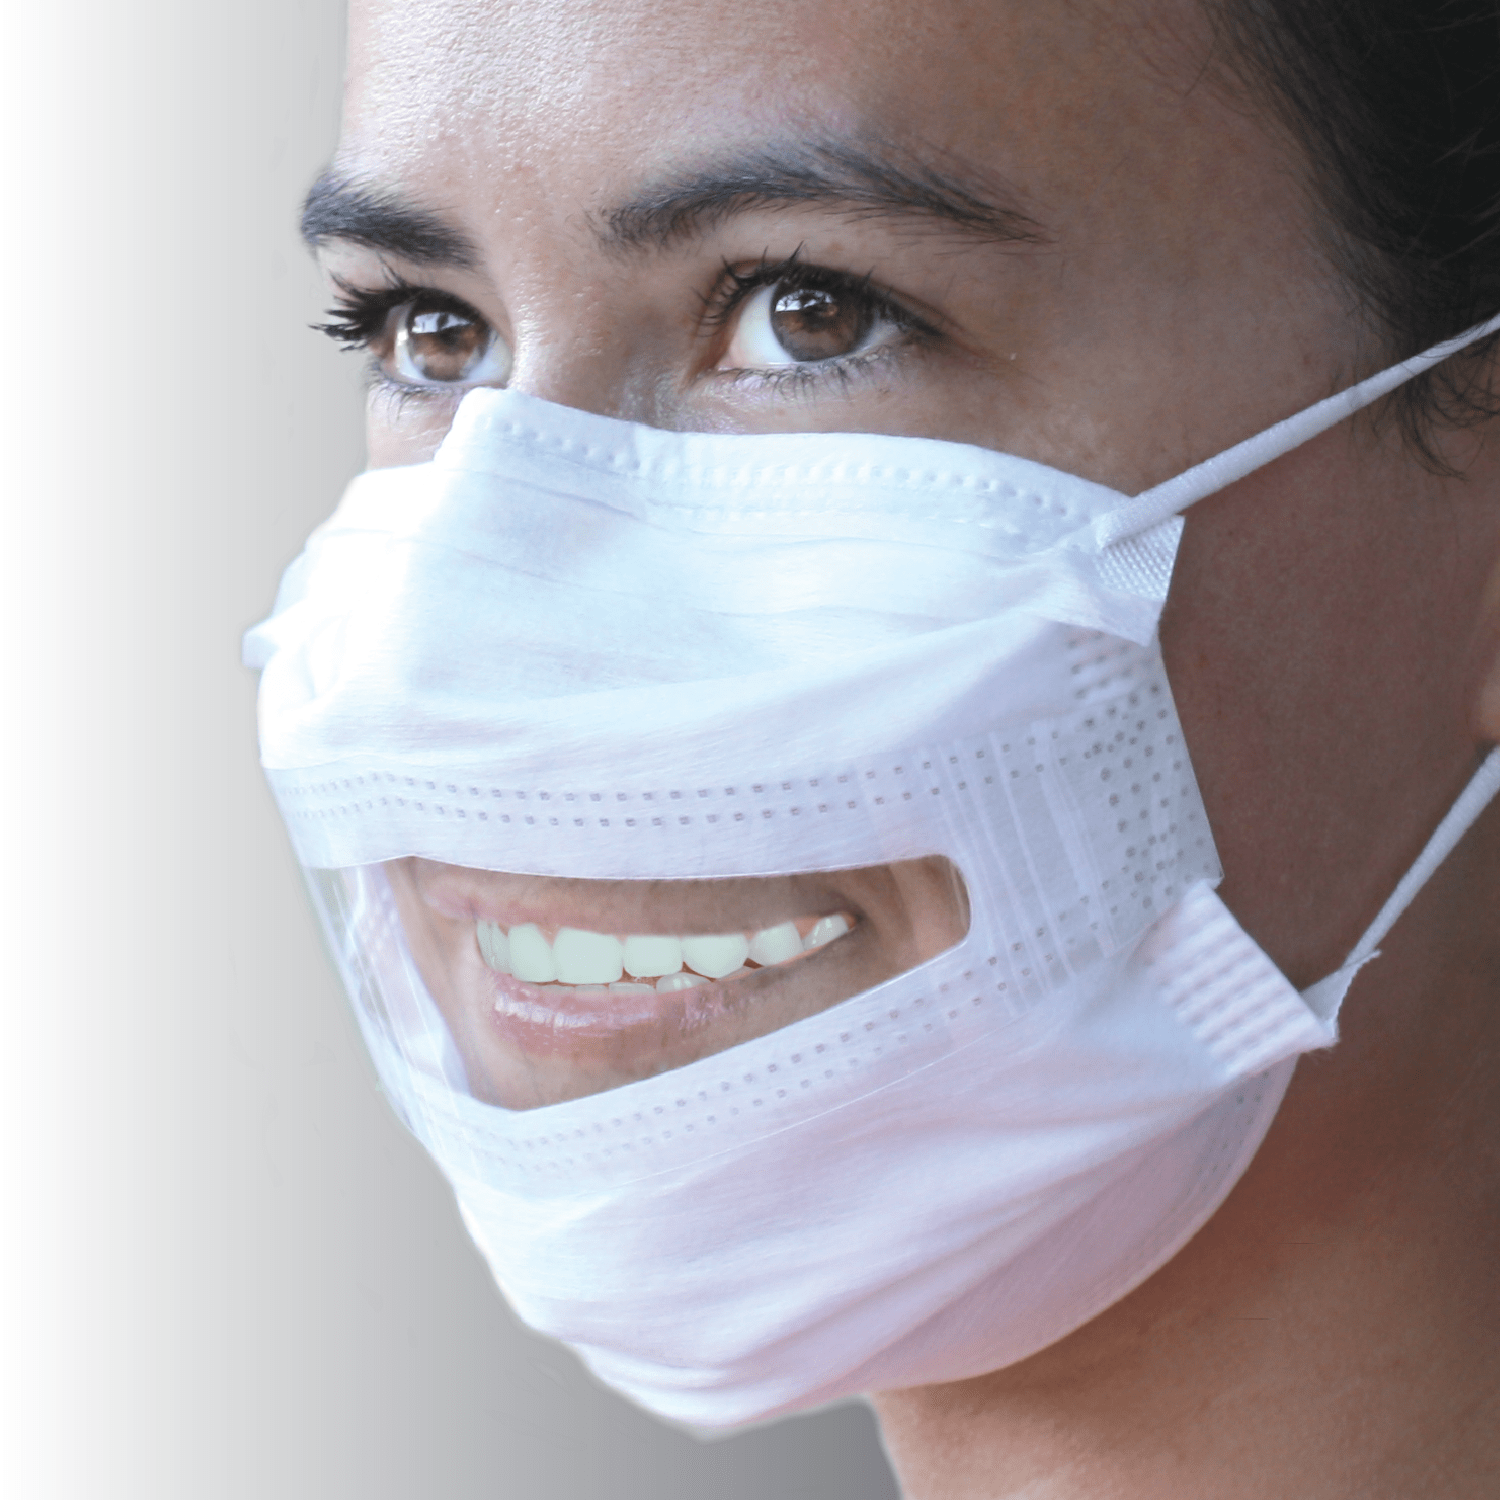 A woman smiles wearing a surgical mask with a window.